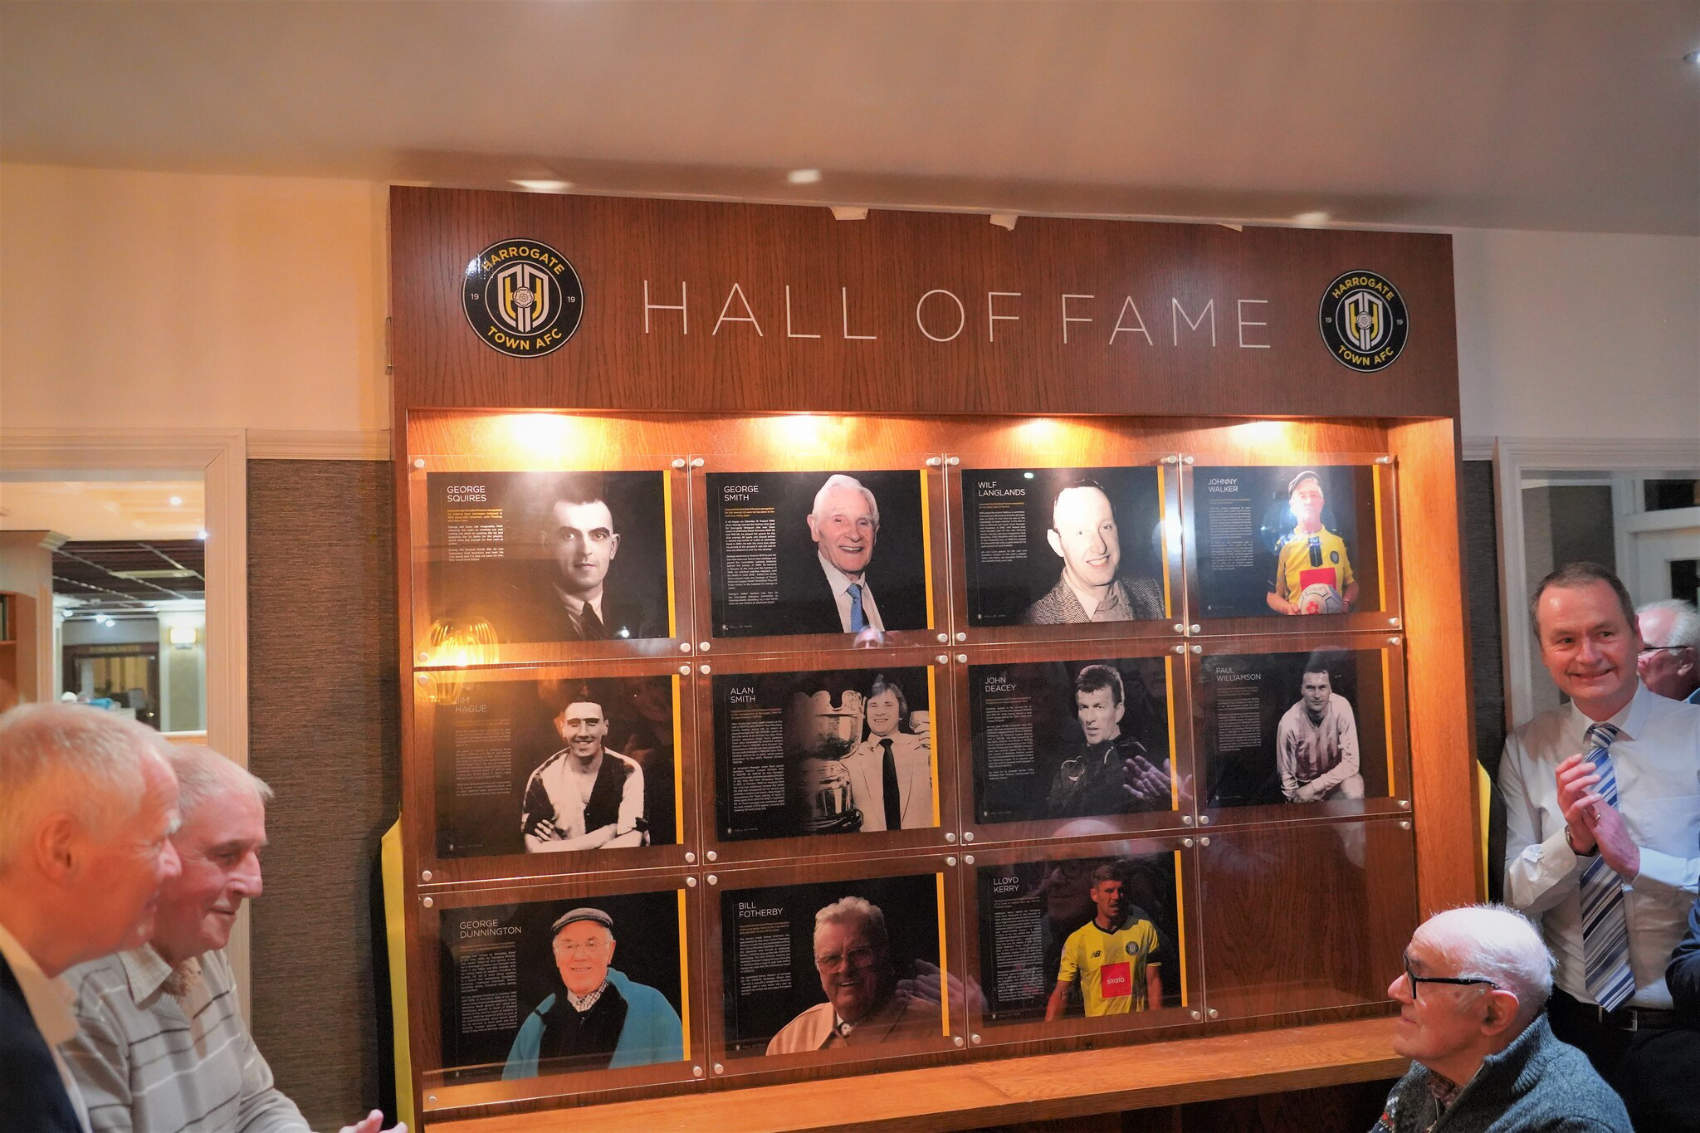 Harrogate Town AFC officially launched their Hall of Fame on Thursday 9th February at Cedar Court Hotel